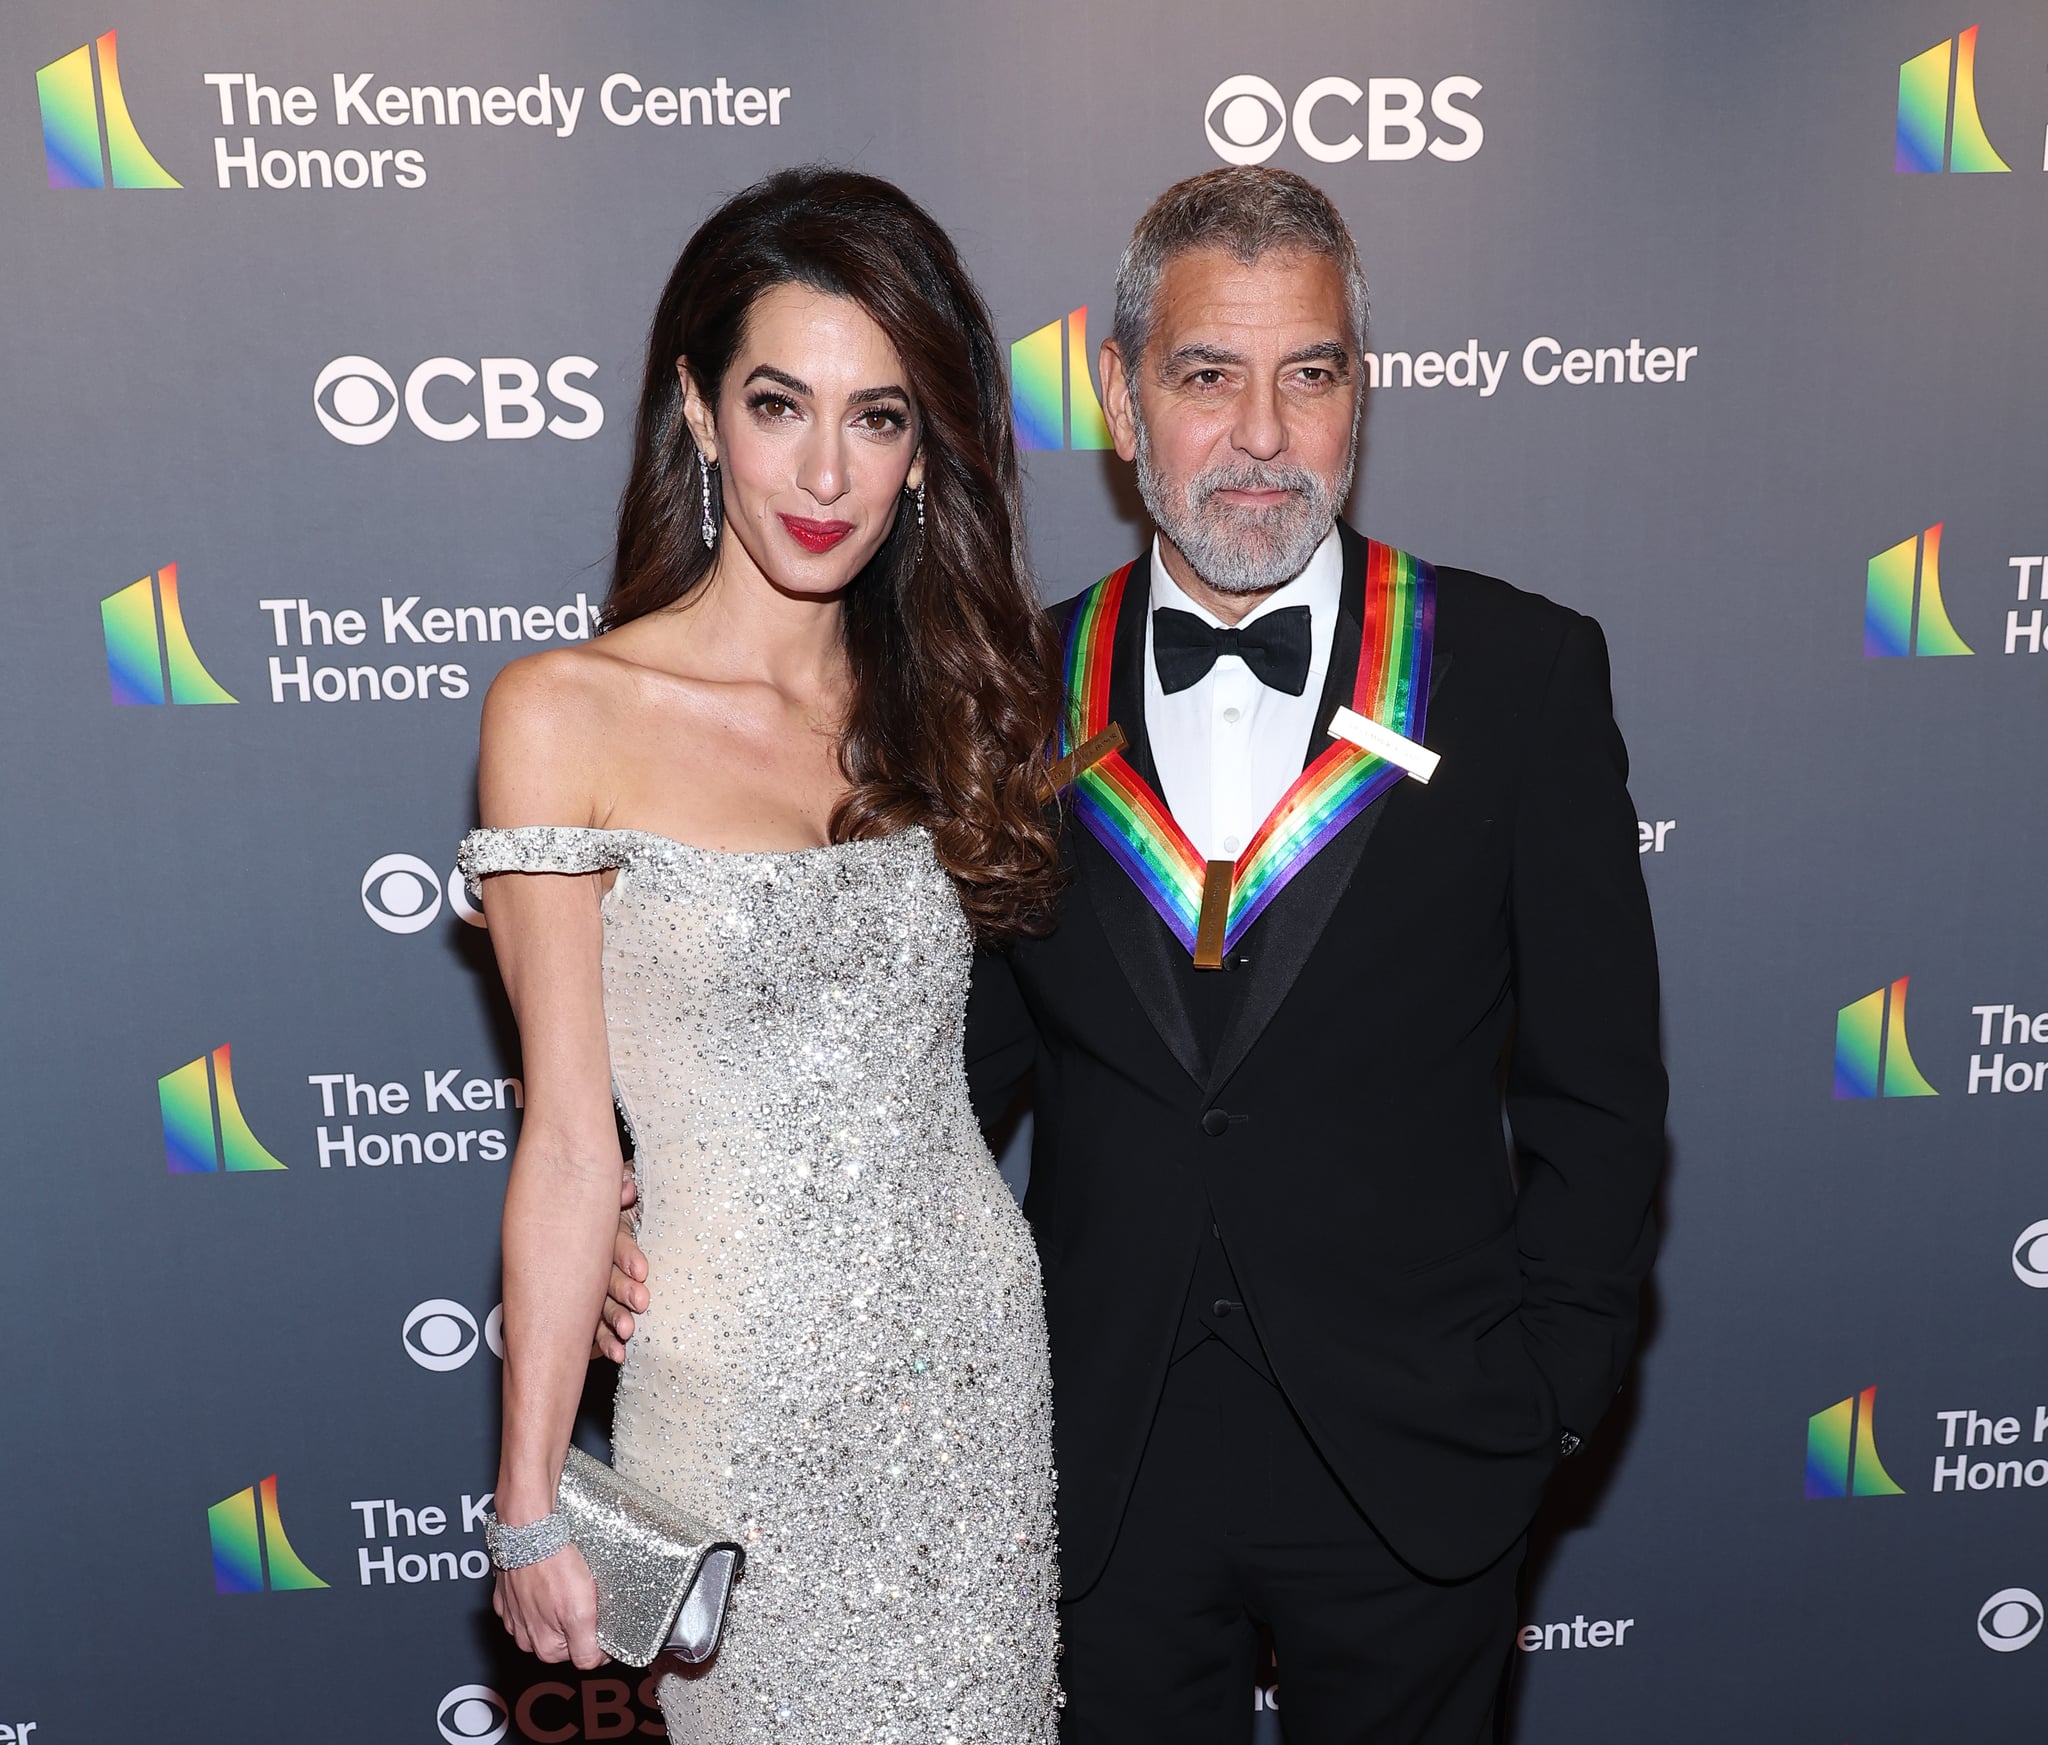 WASHINGTON, DC - DECEMBER 04: Honoree George Clooney (R) and Amal Clooney attend the 45th Kennedy Center Honors Ceremony at Kennedy Center on December 04, 2022 in Washington, DC.  (Photo by Paul Morigi/Getty Images)